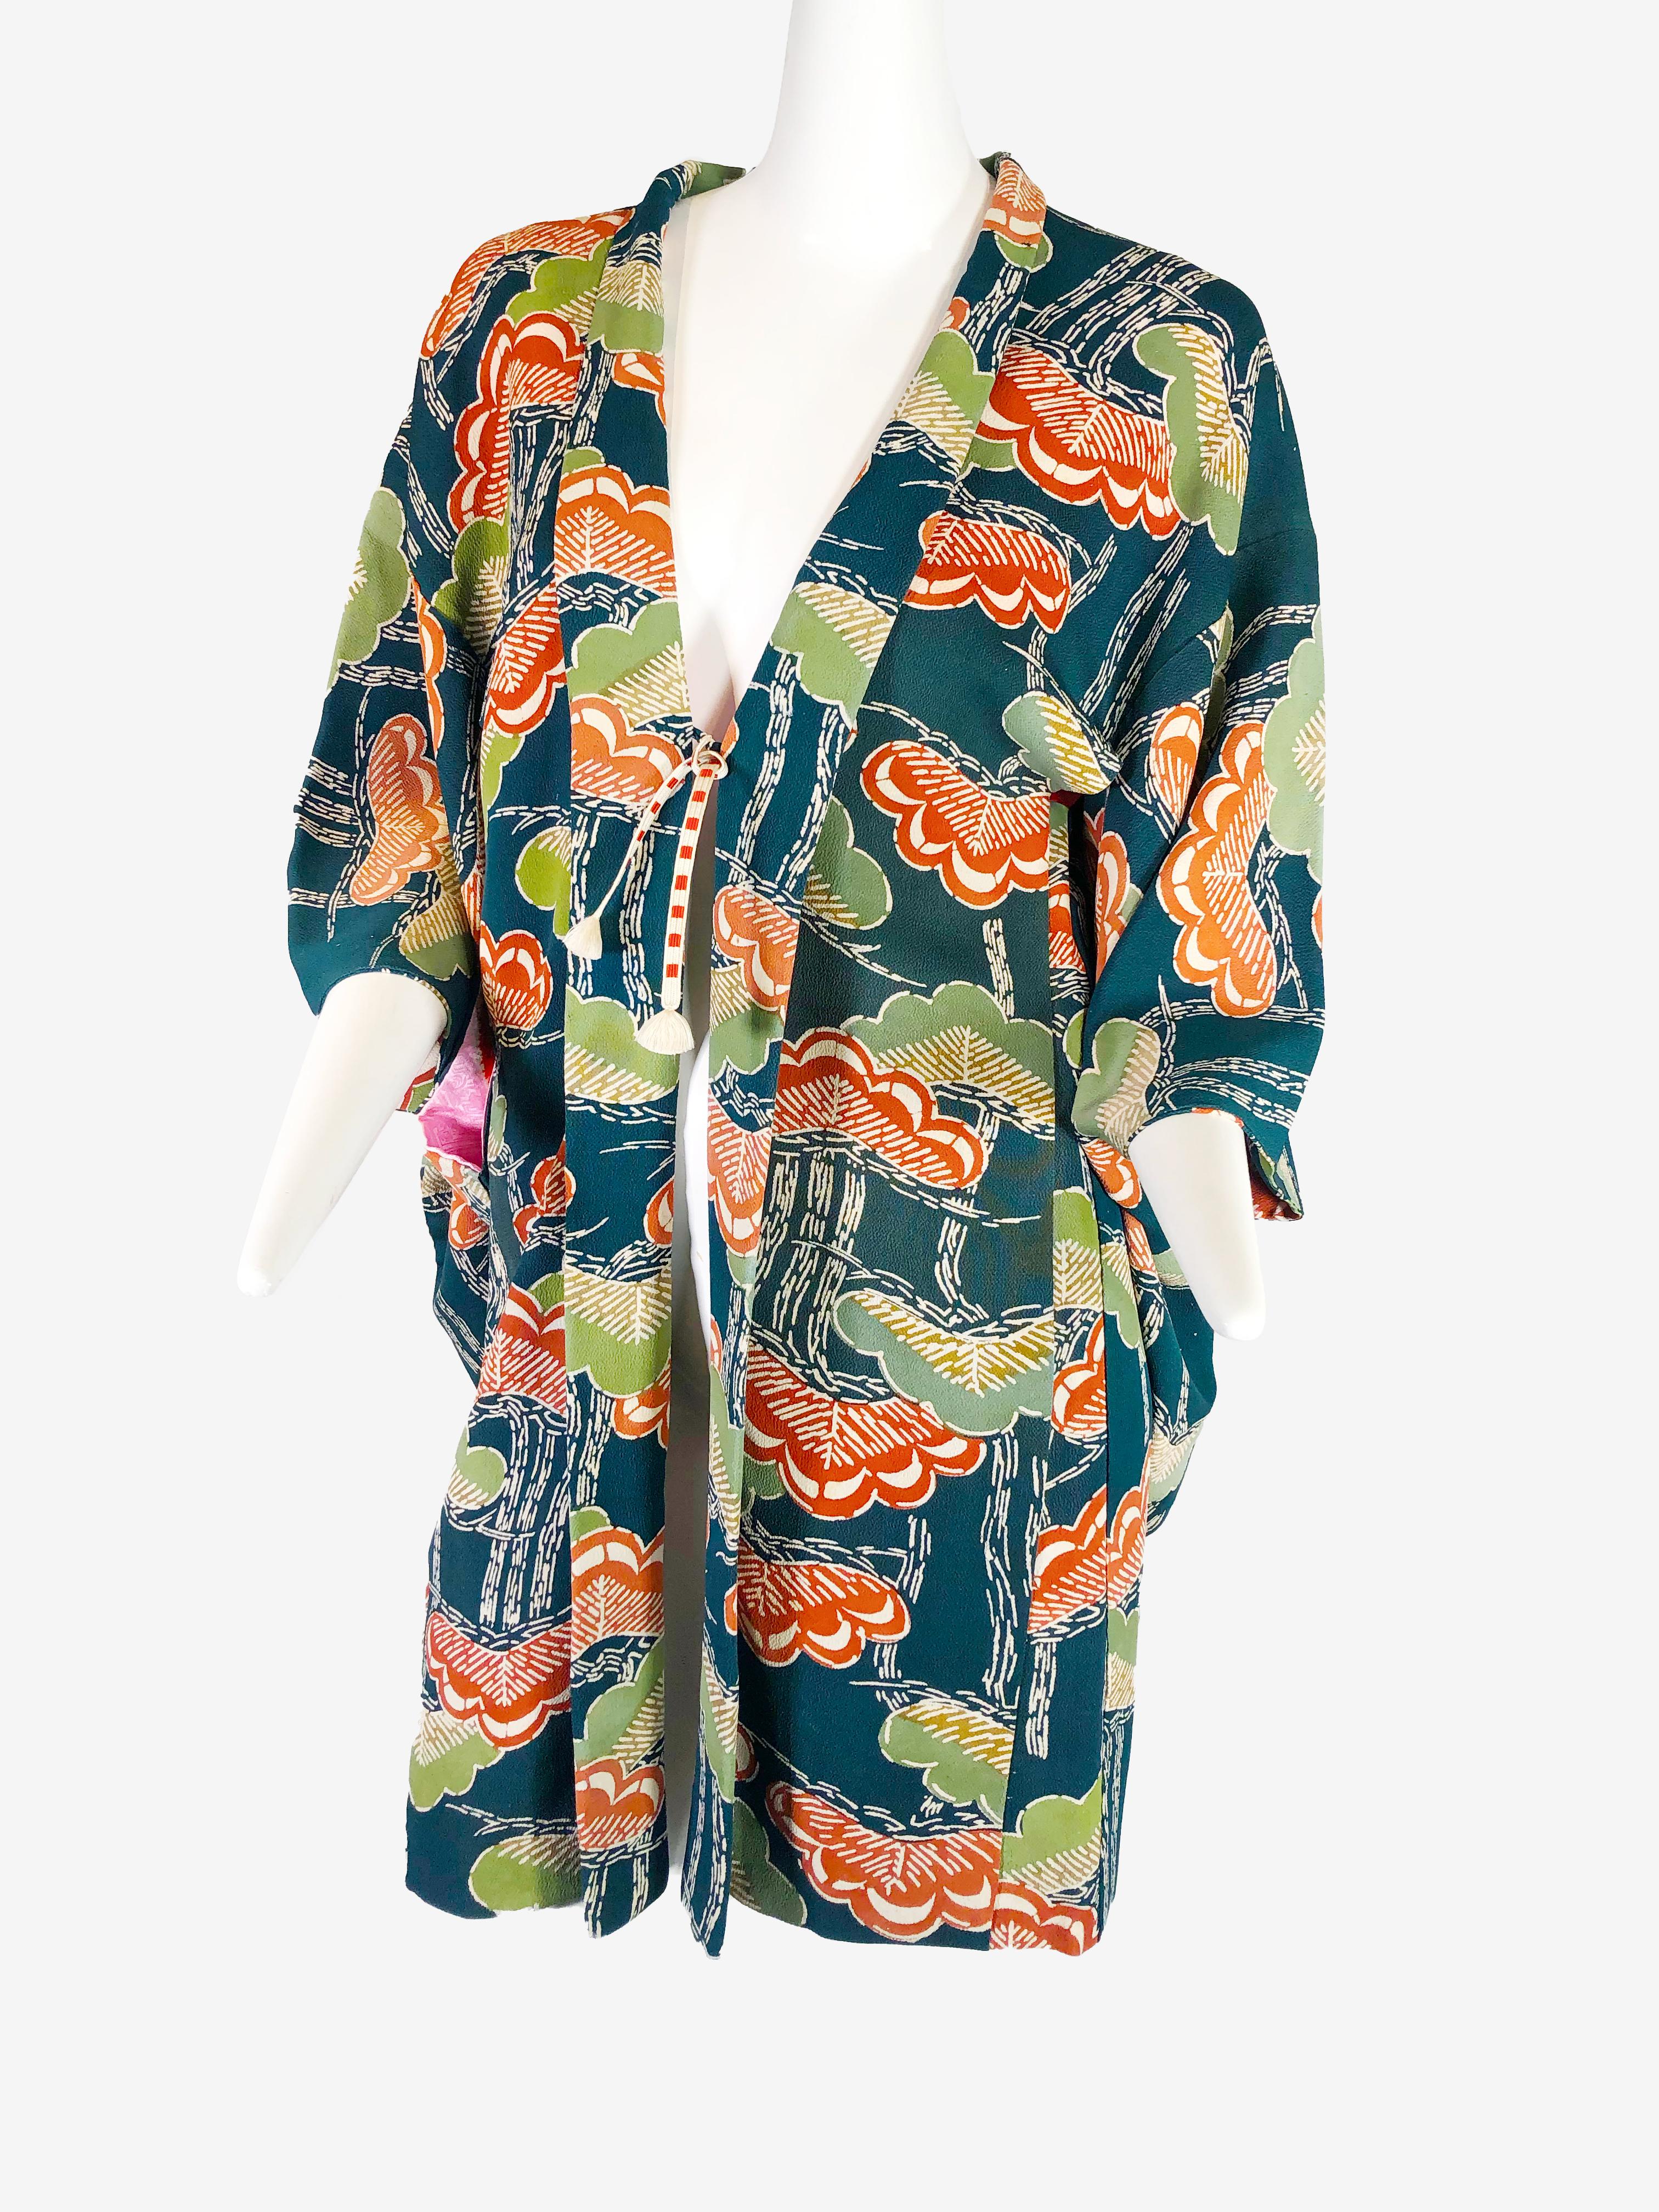 A 1940s traditionally-styled silk kimono: knee-length with a stylized ginkgo leaf print in an olive green persimmon and black colorway. Traditional contrasting silk lining in top half is fashioned of a beautiful pink and orange tie-dyed pattern.